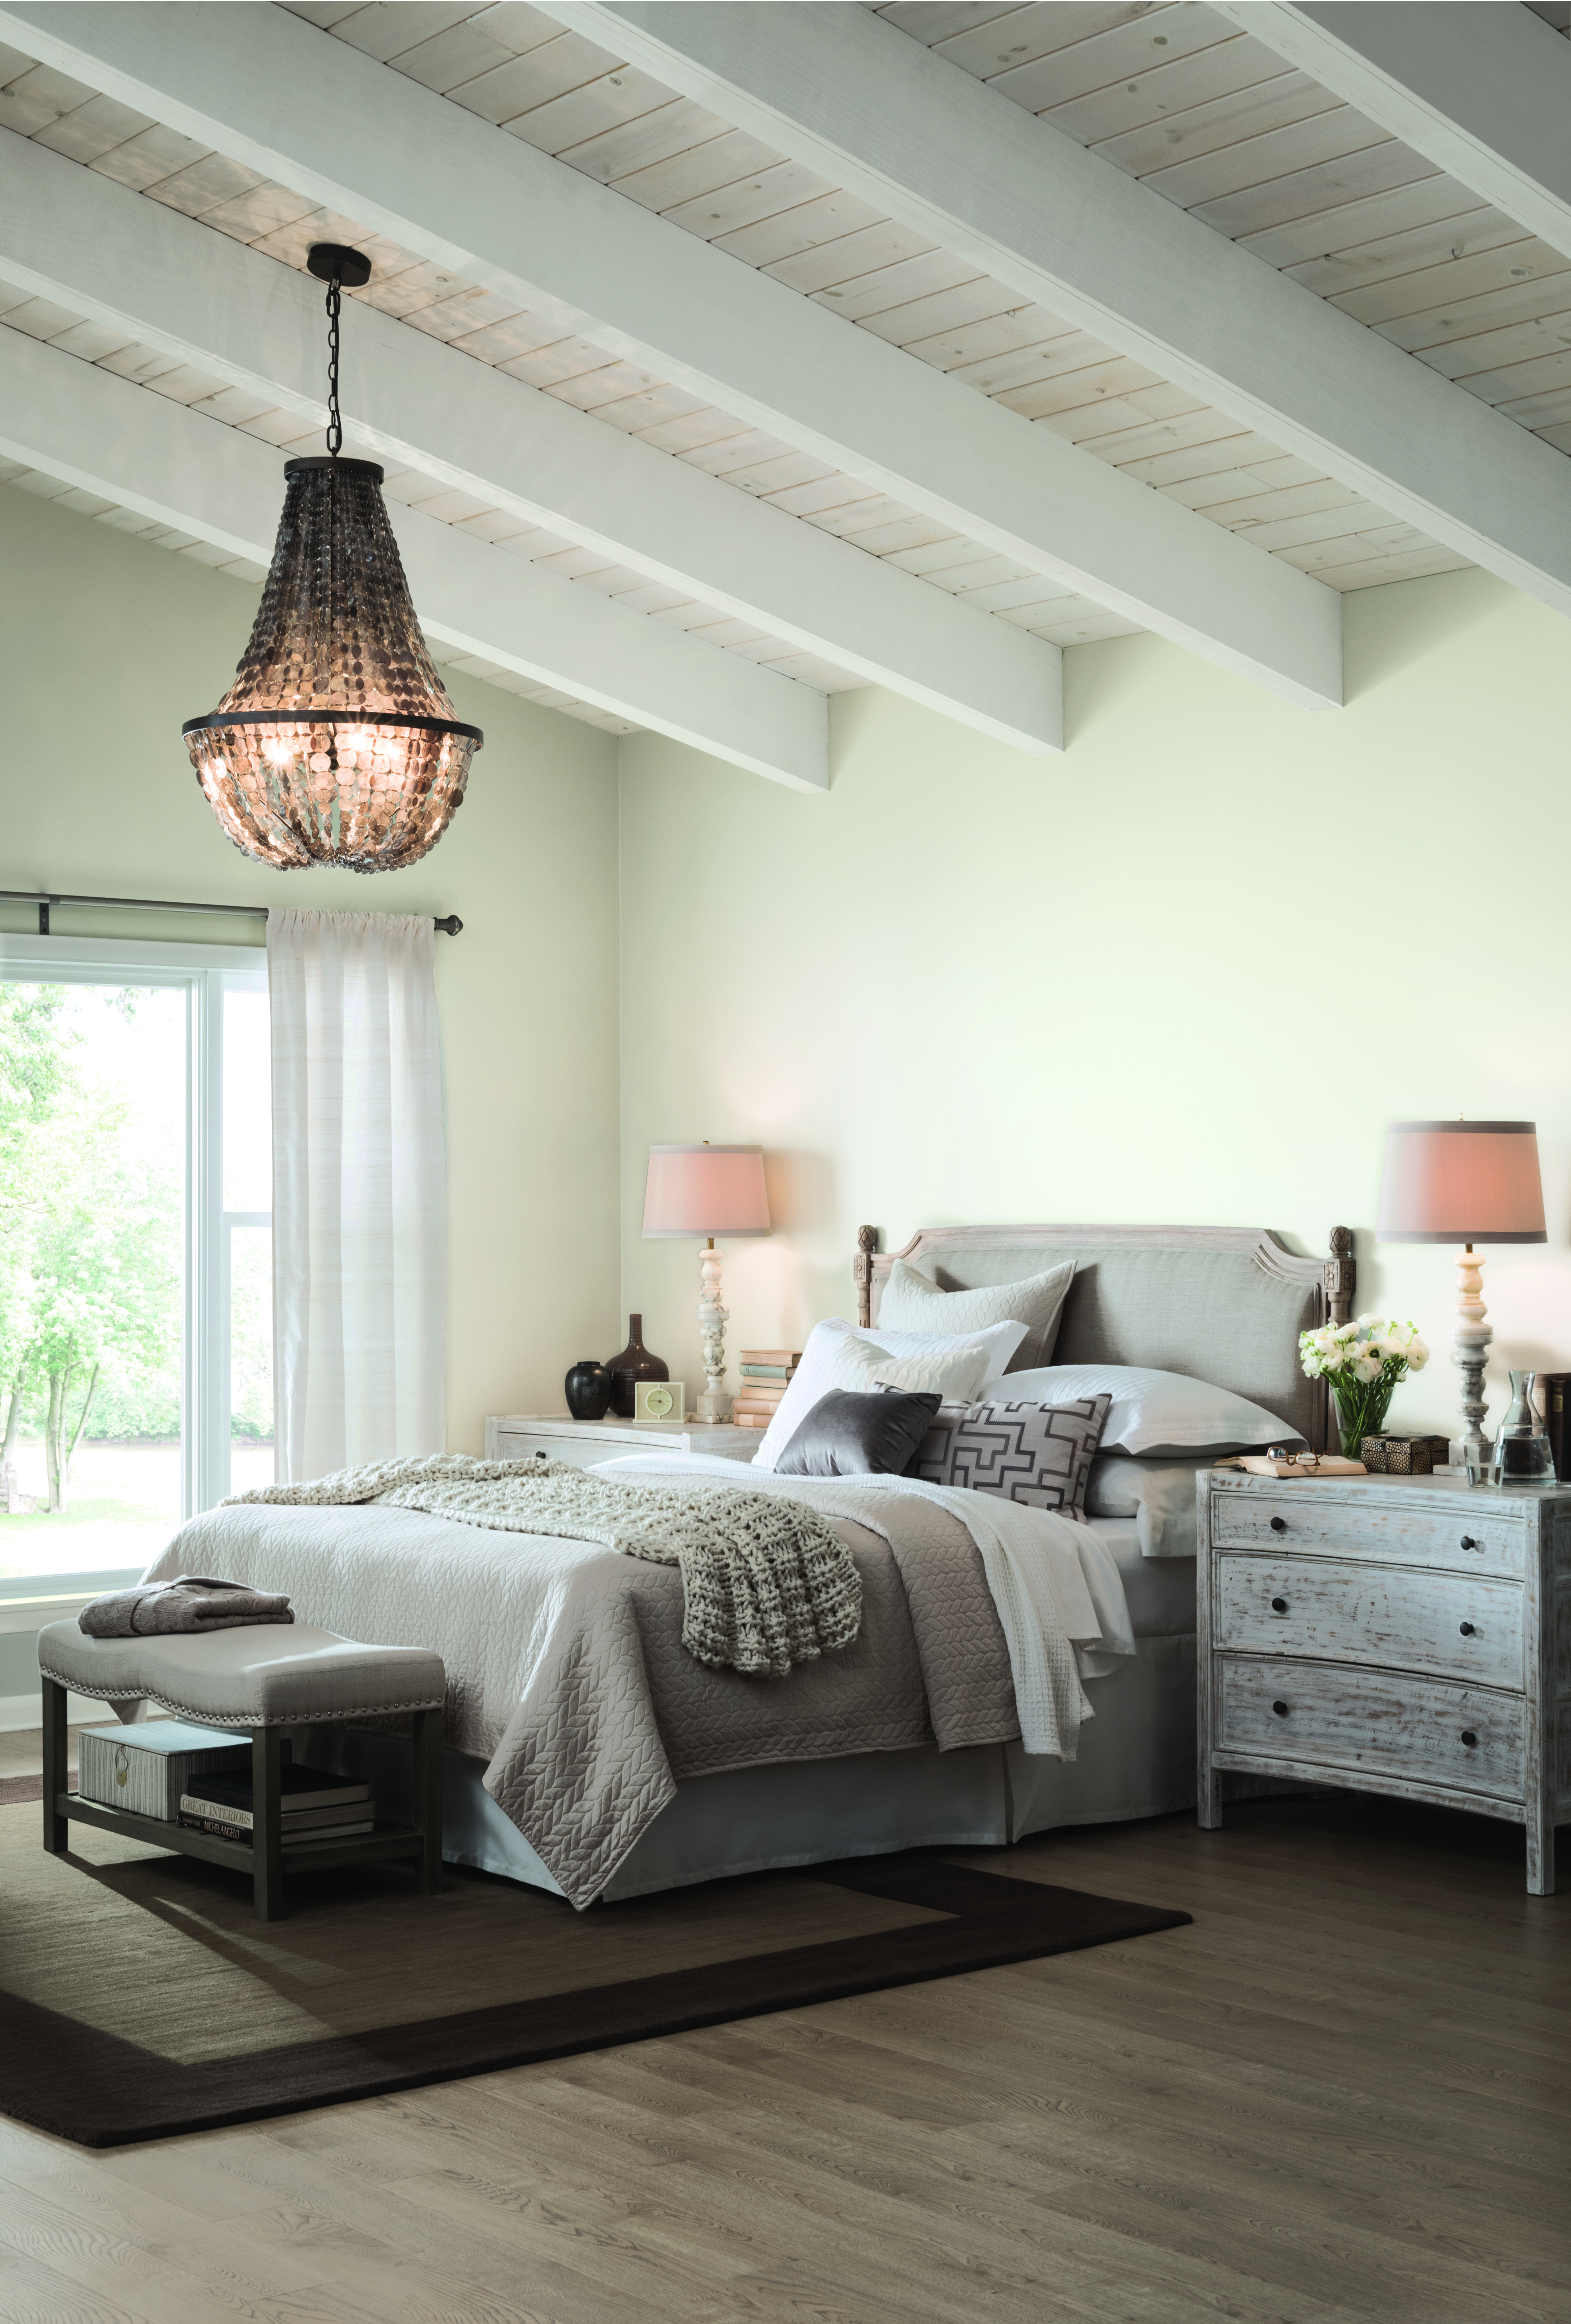 SHERWIN-WILLIAMS NAMES ALABASTER 2016 COLOR OF THE YEAR